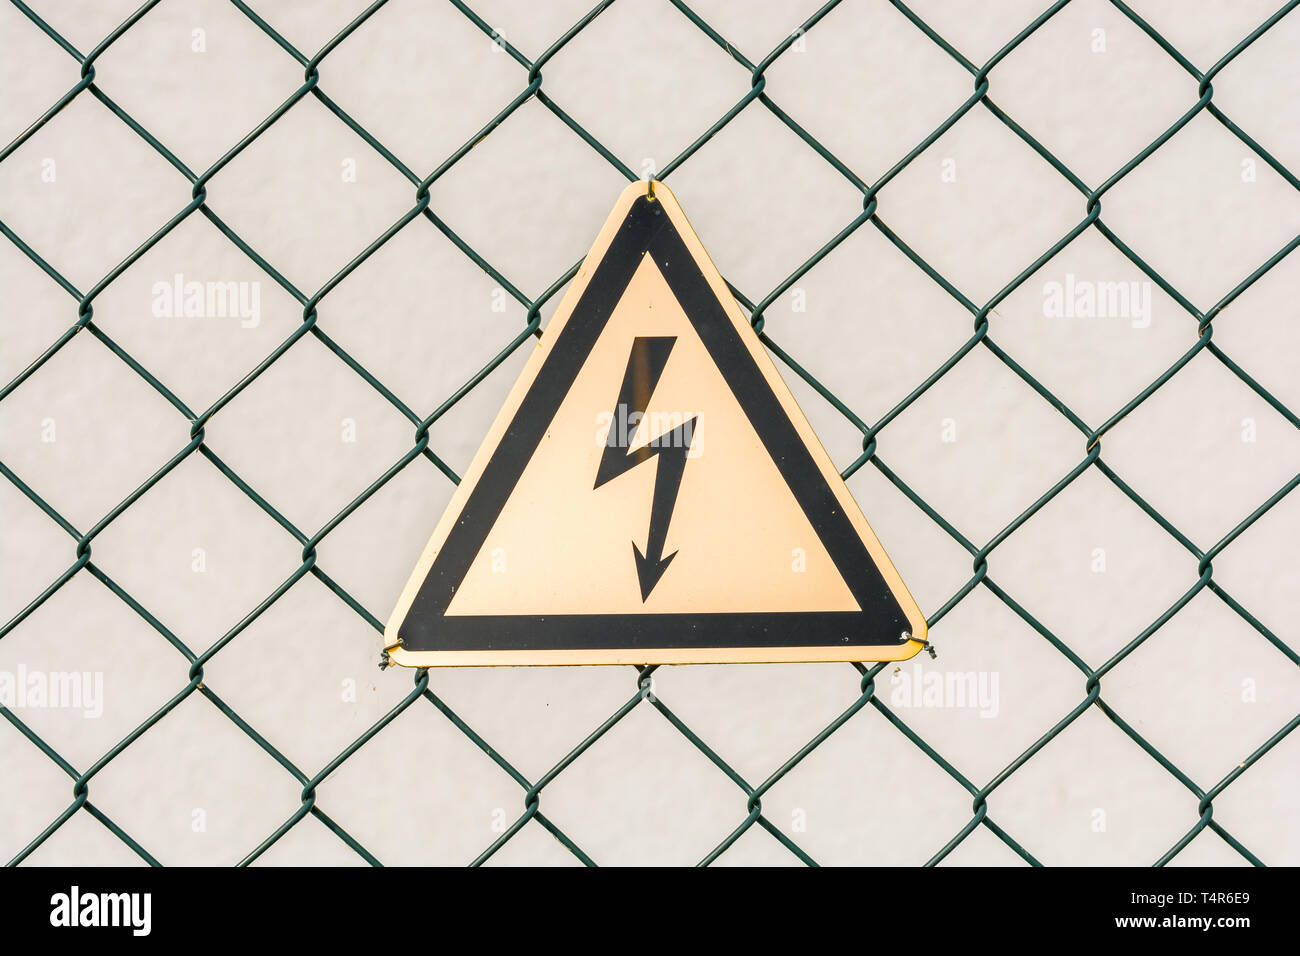 Warning about danger due to high voltage Stock Photo